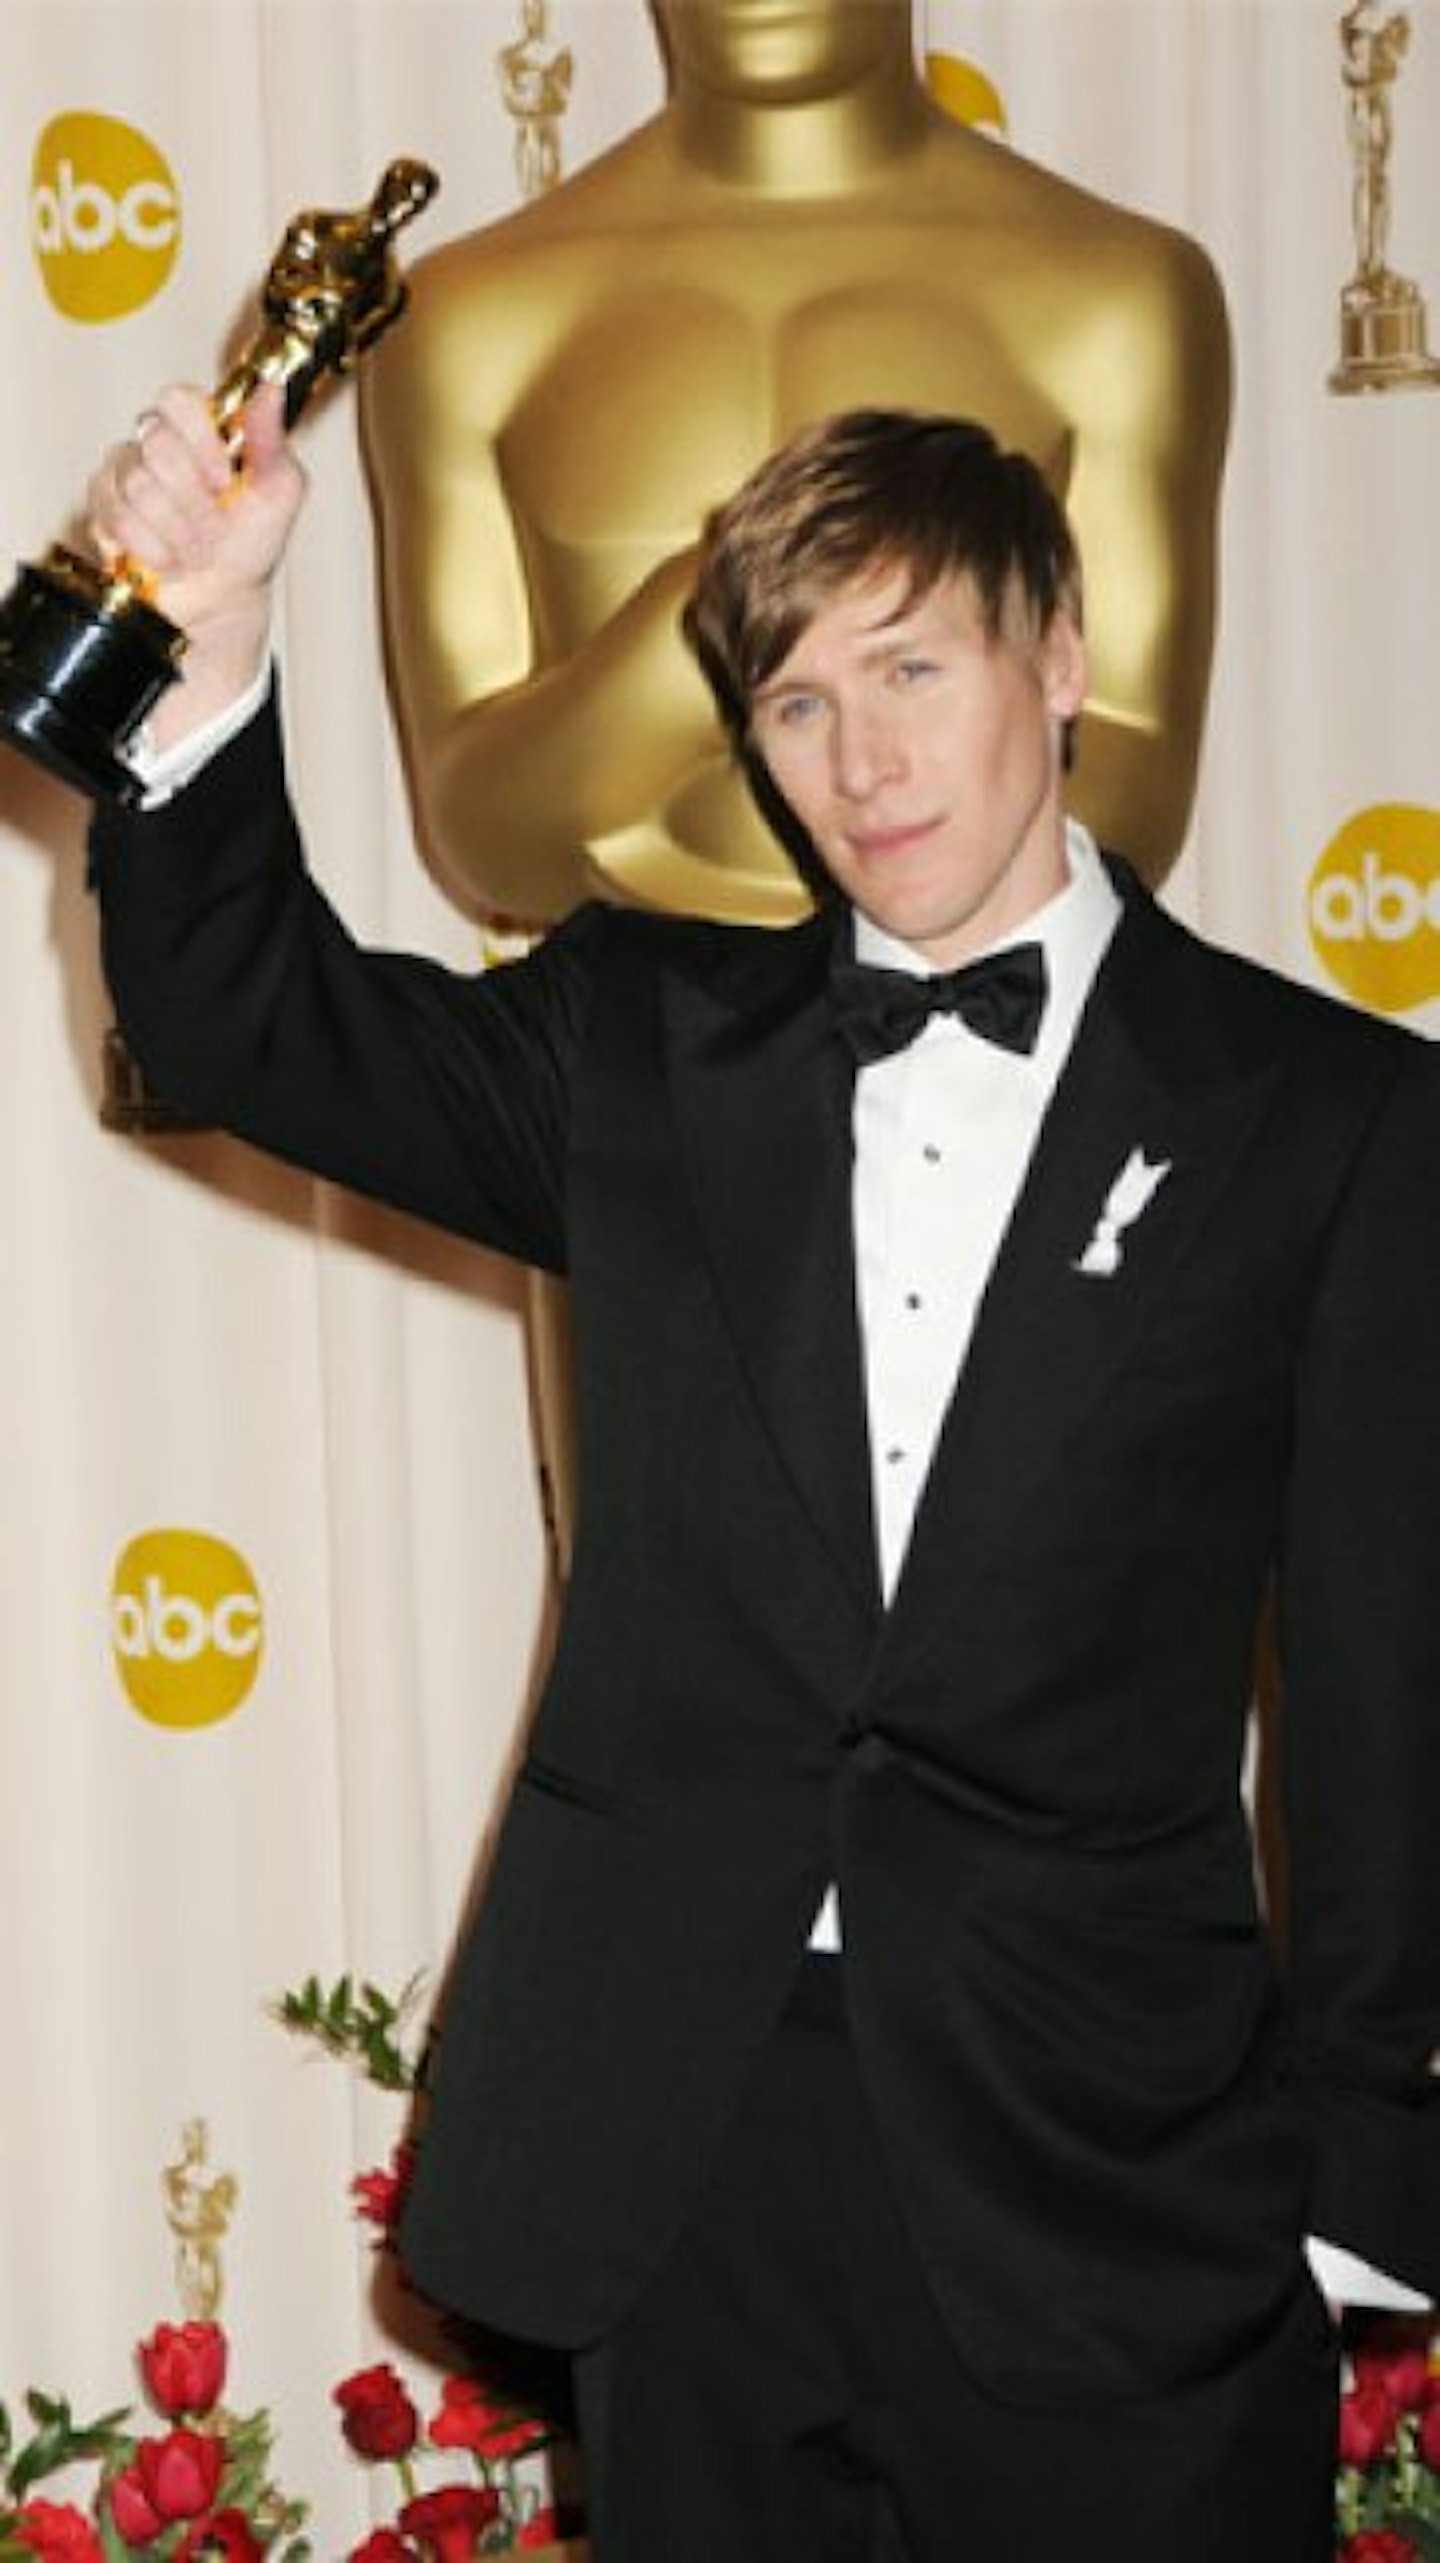 Dustin won an academy award in 2009 after writing the script for 'Milk.'